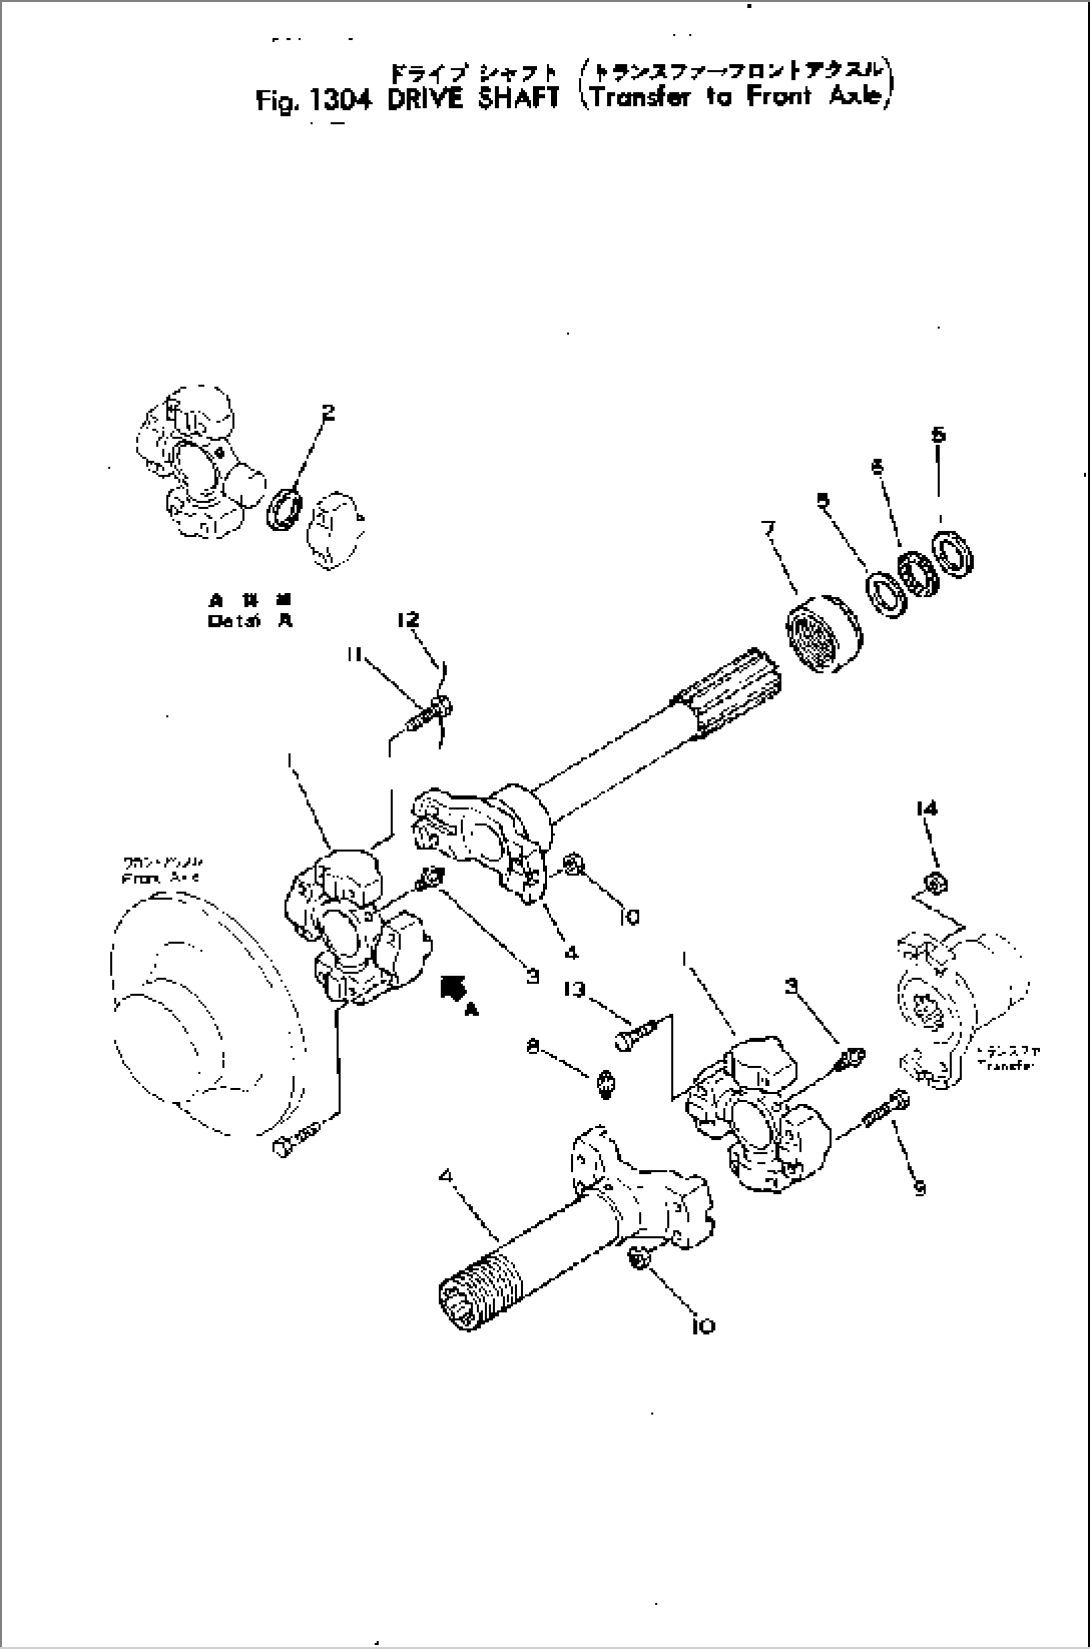 DRIVE SHAFT (TRANSFER TO FRONT AXLE)(#3-)